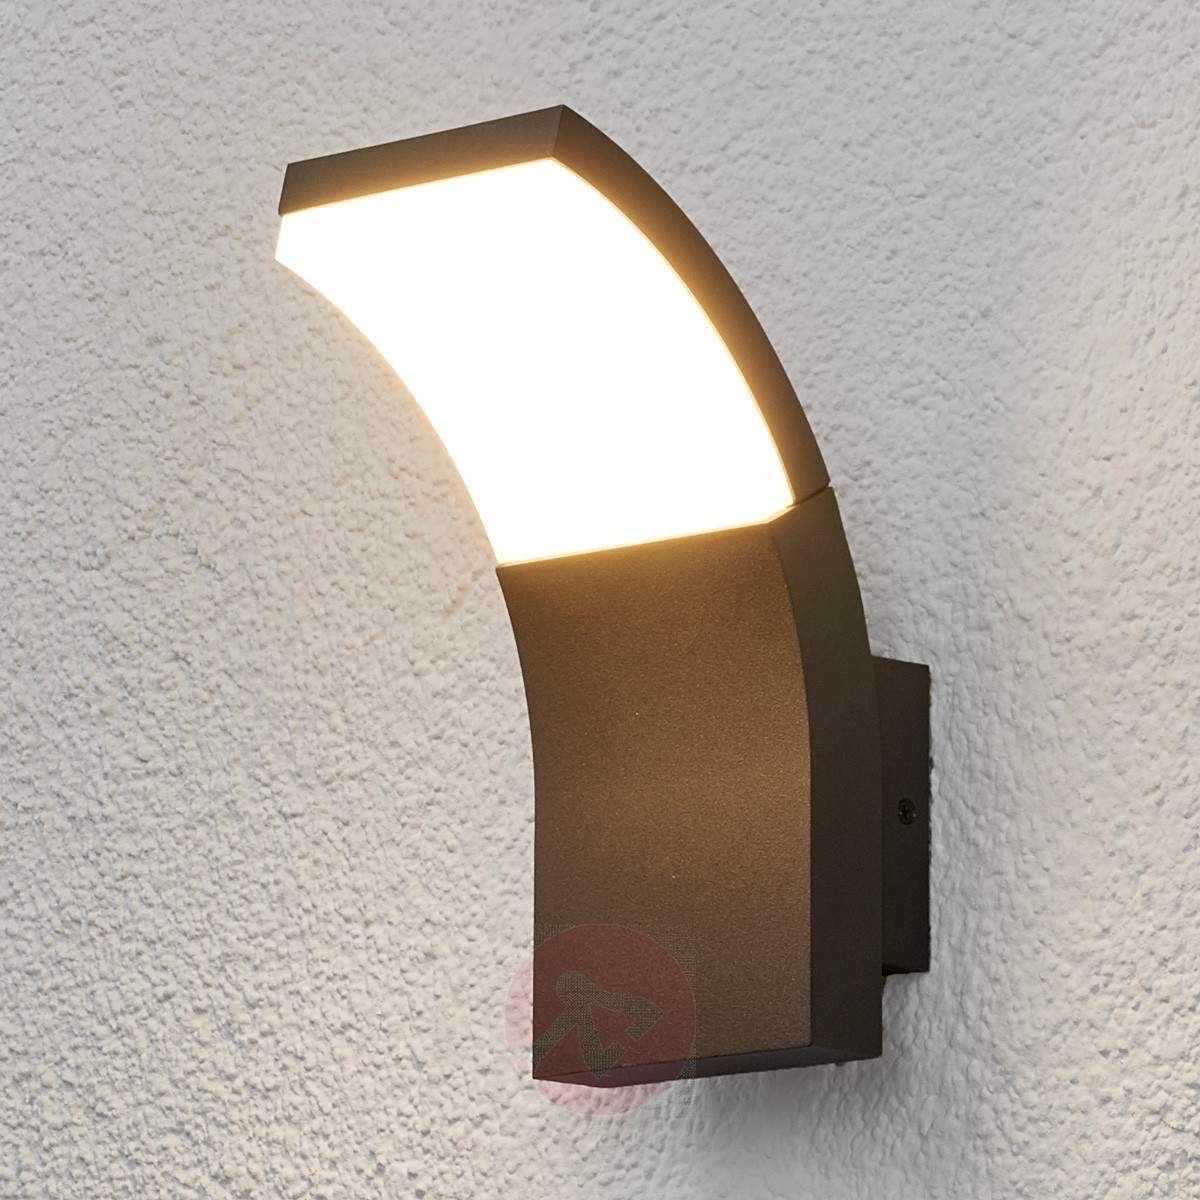 Led Outdoor Wall Light Timm | Lights.co (View 2 of 15)